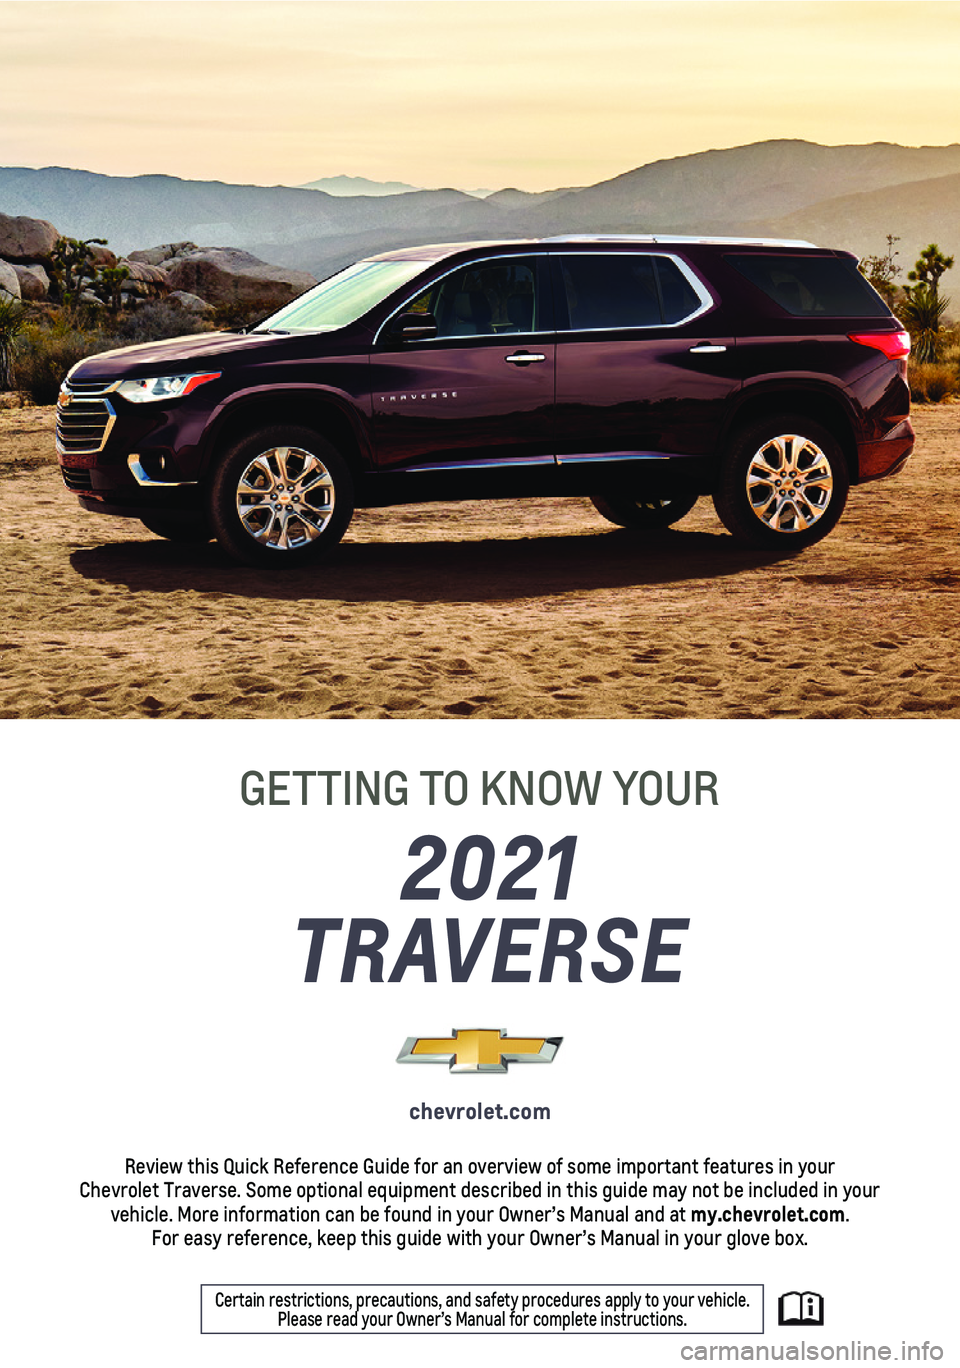 CHEVROLET TRAVERSE 2021  Get To Know Guide 1
2021 
TRAVERSE
GETTING TO KNOW YOUR
chevrolet.com
Review this Quick Reference Guide for an overview of some important feat\
ures in your  Chevrolet Traverse. Some optional equipment described in thi